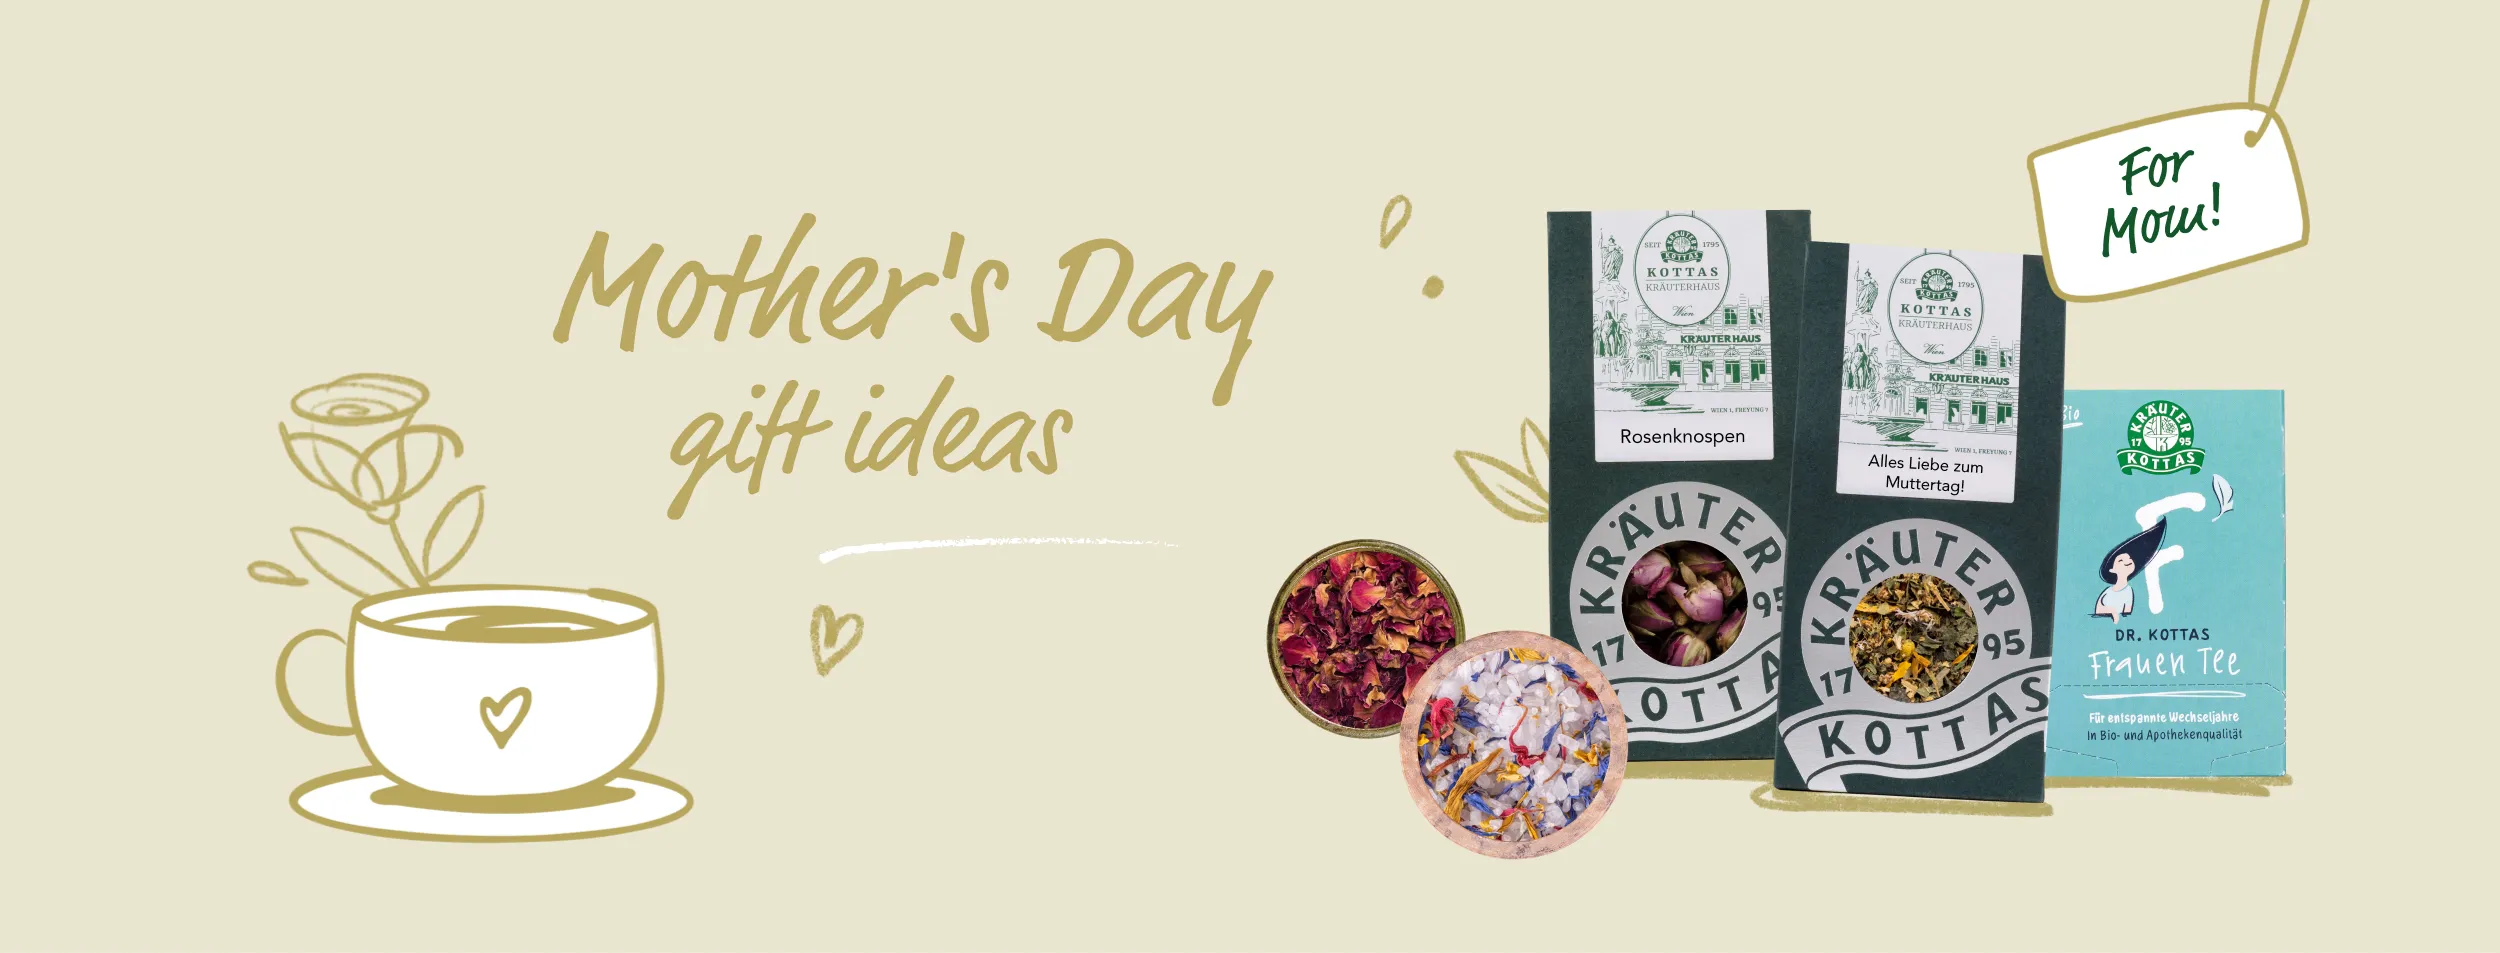 Sand-coloured background with an illustrated teacup with hearts and a small rose, next to it tea packaging for women's tea and "Happy Mother's Day" tea as well as green packaging with the words "Rosebuds", images of flowering salt and a rosy incense blend. "Mother's day gift ideas" is written in the centre and "for mom" is written on the right-hand edge.